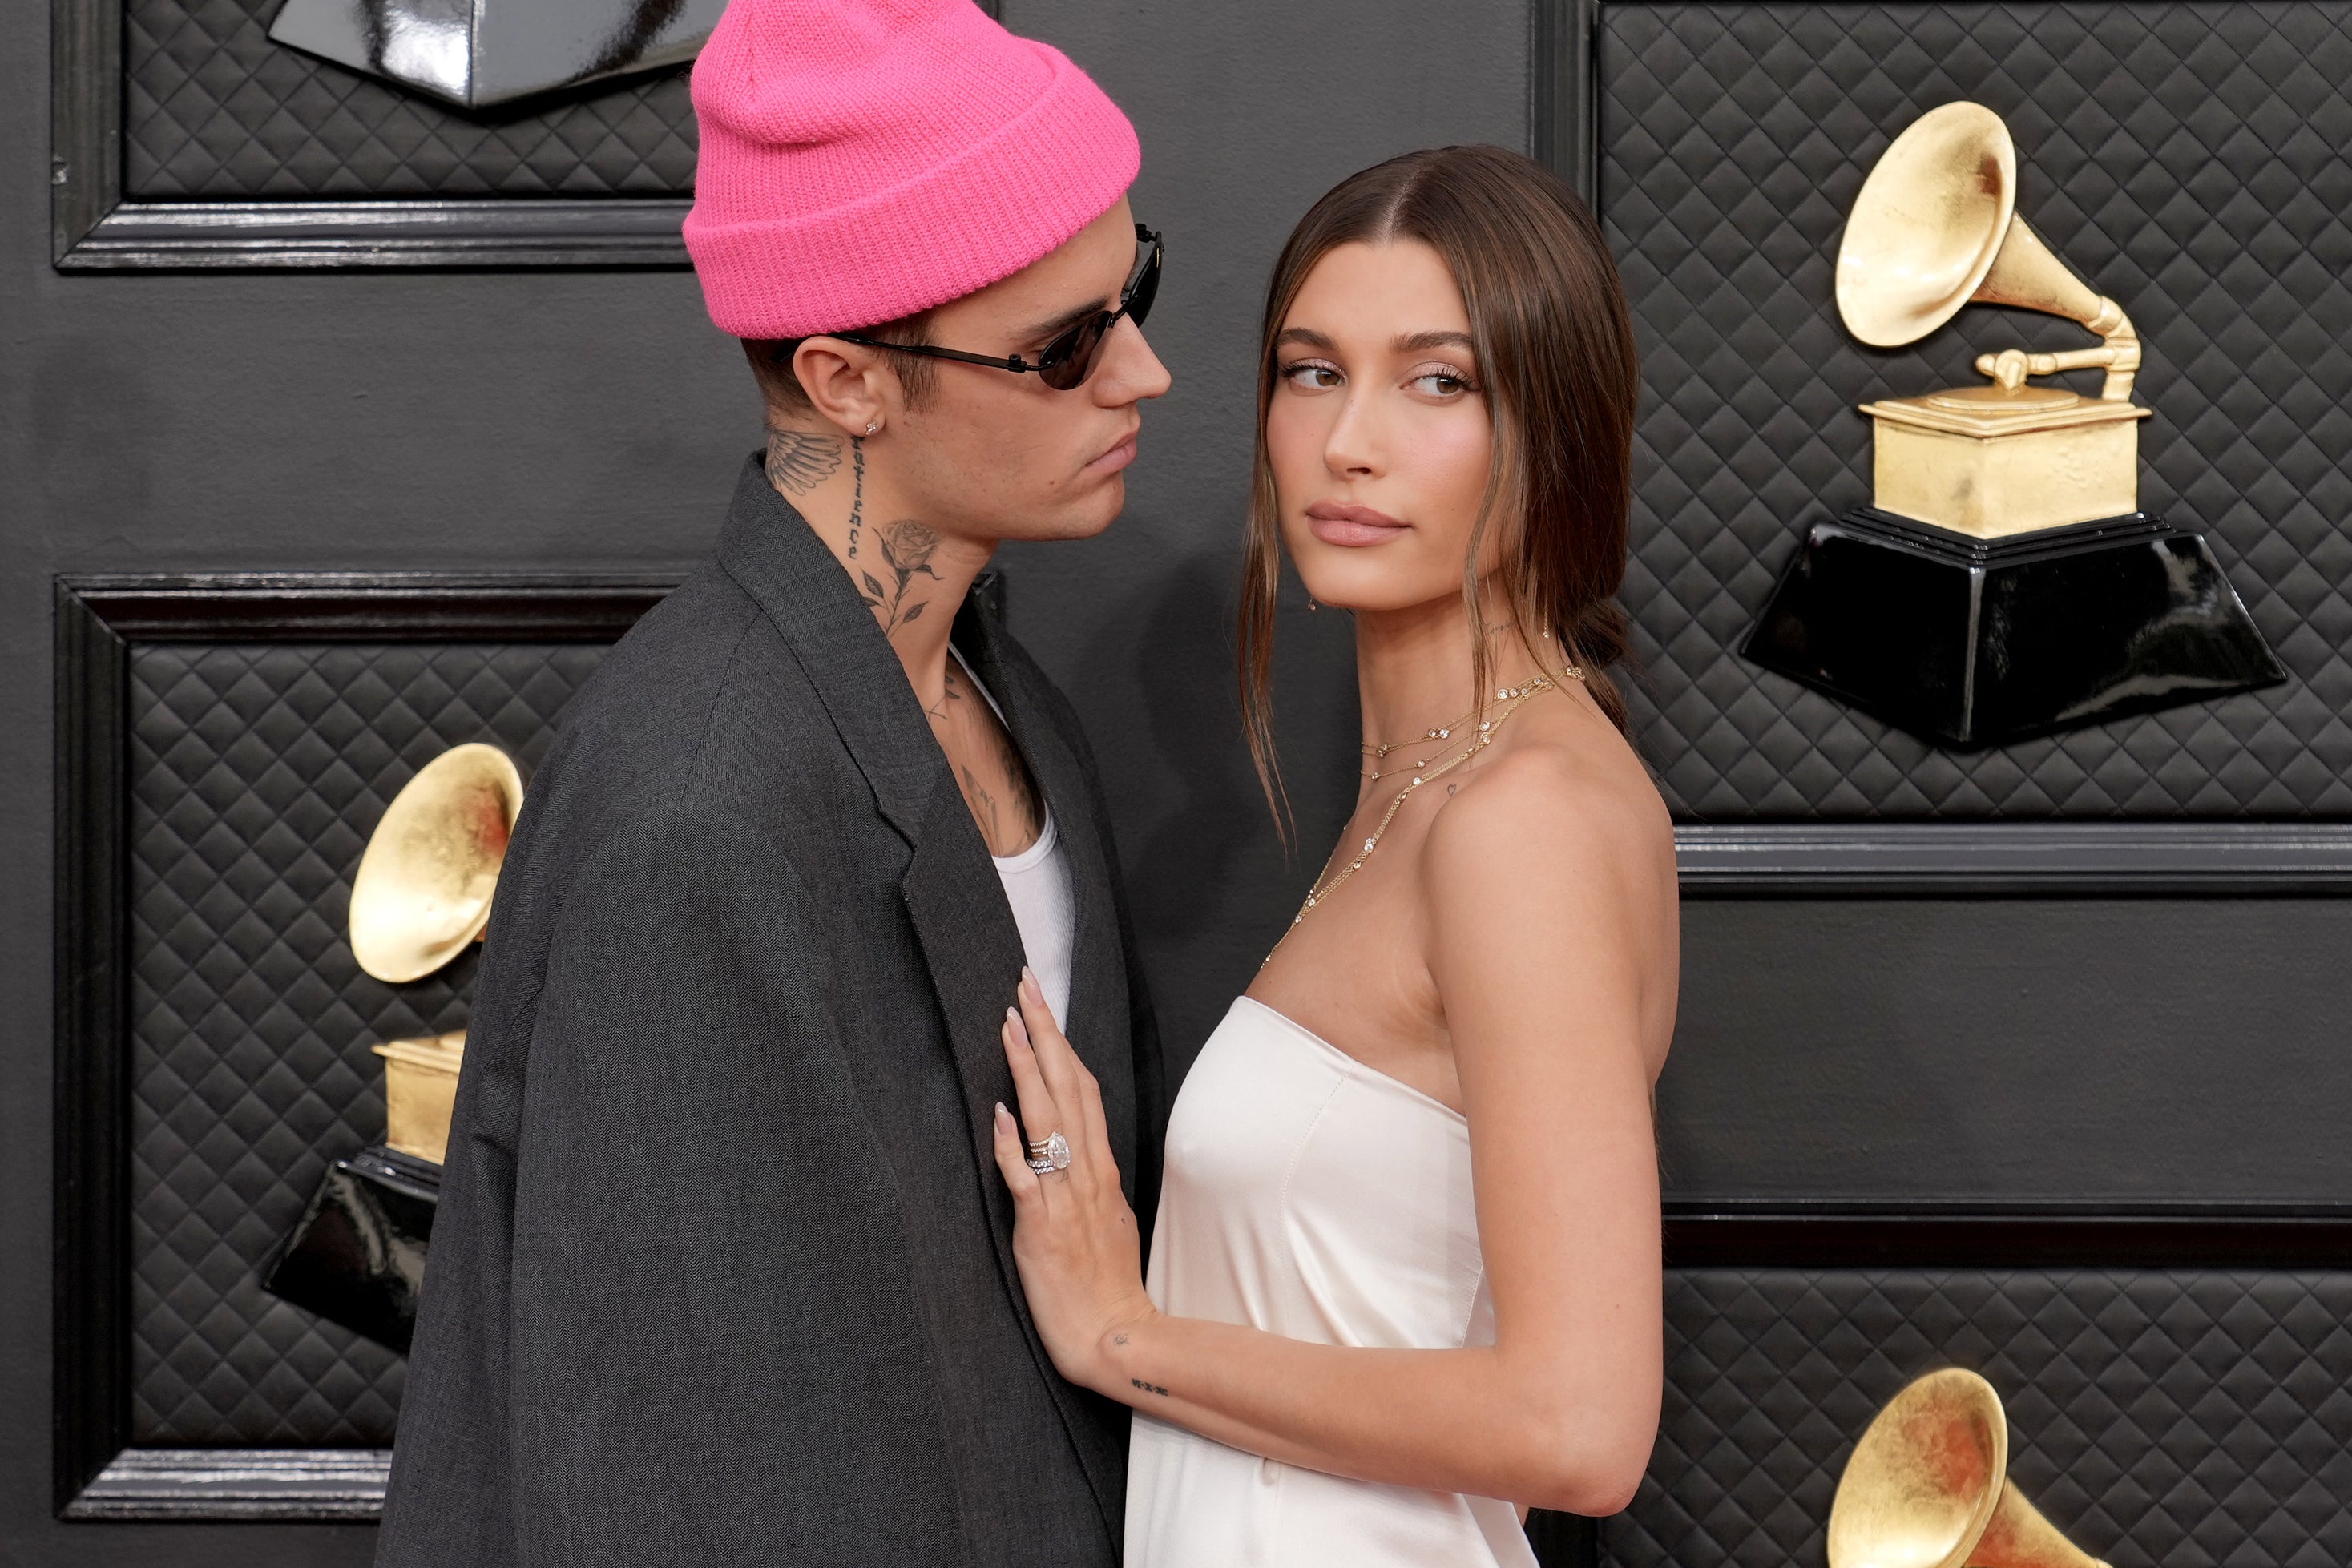 After Speculation They Were Facing “Difficult Times” In Their Marriage, Justin And Hailey Bieber Apparently See Her Pregnancy As A “Way To Move Forward”